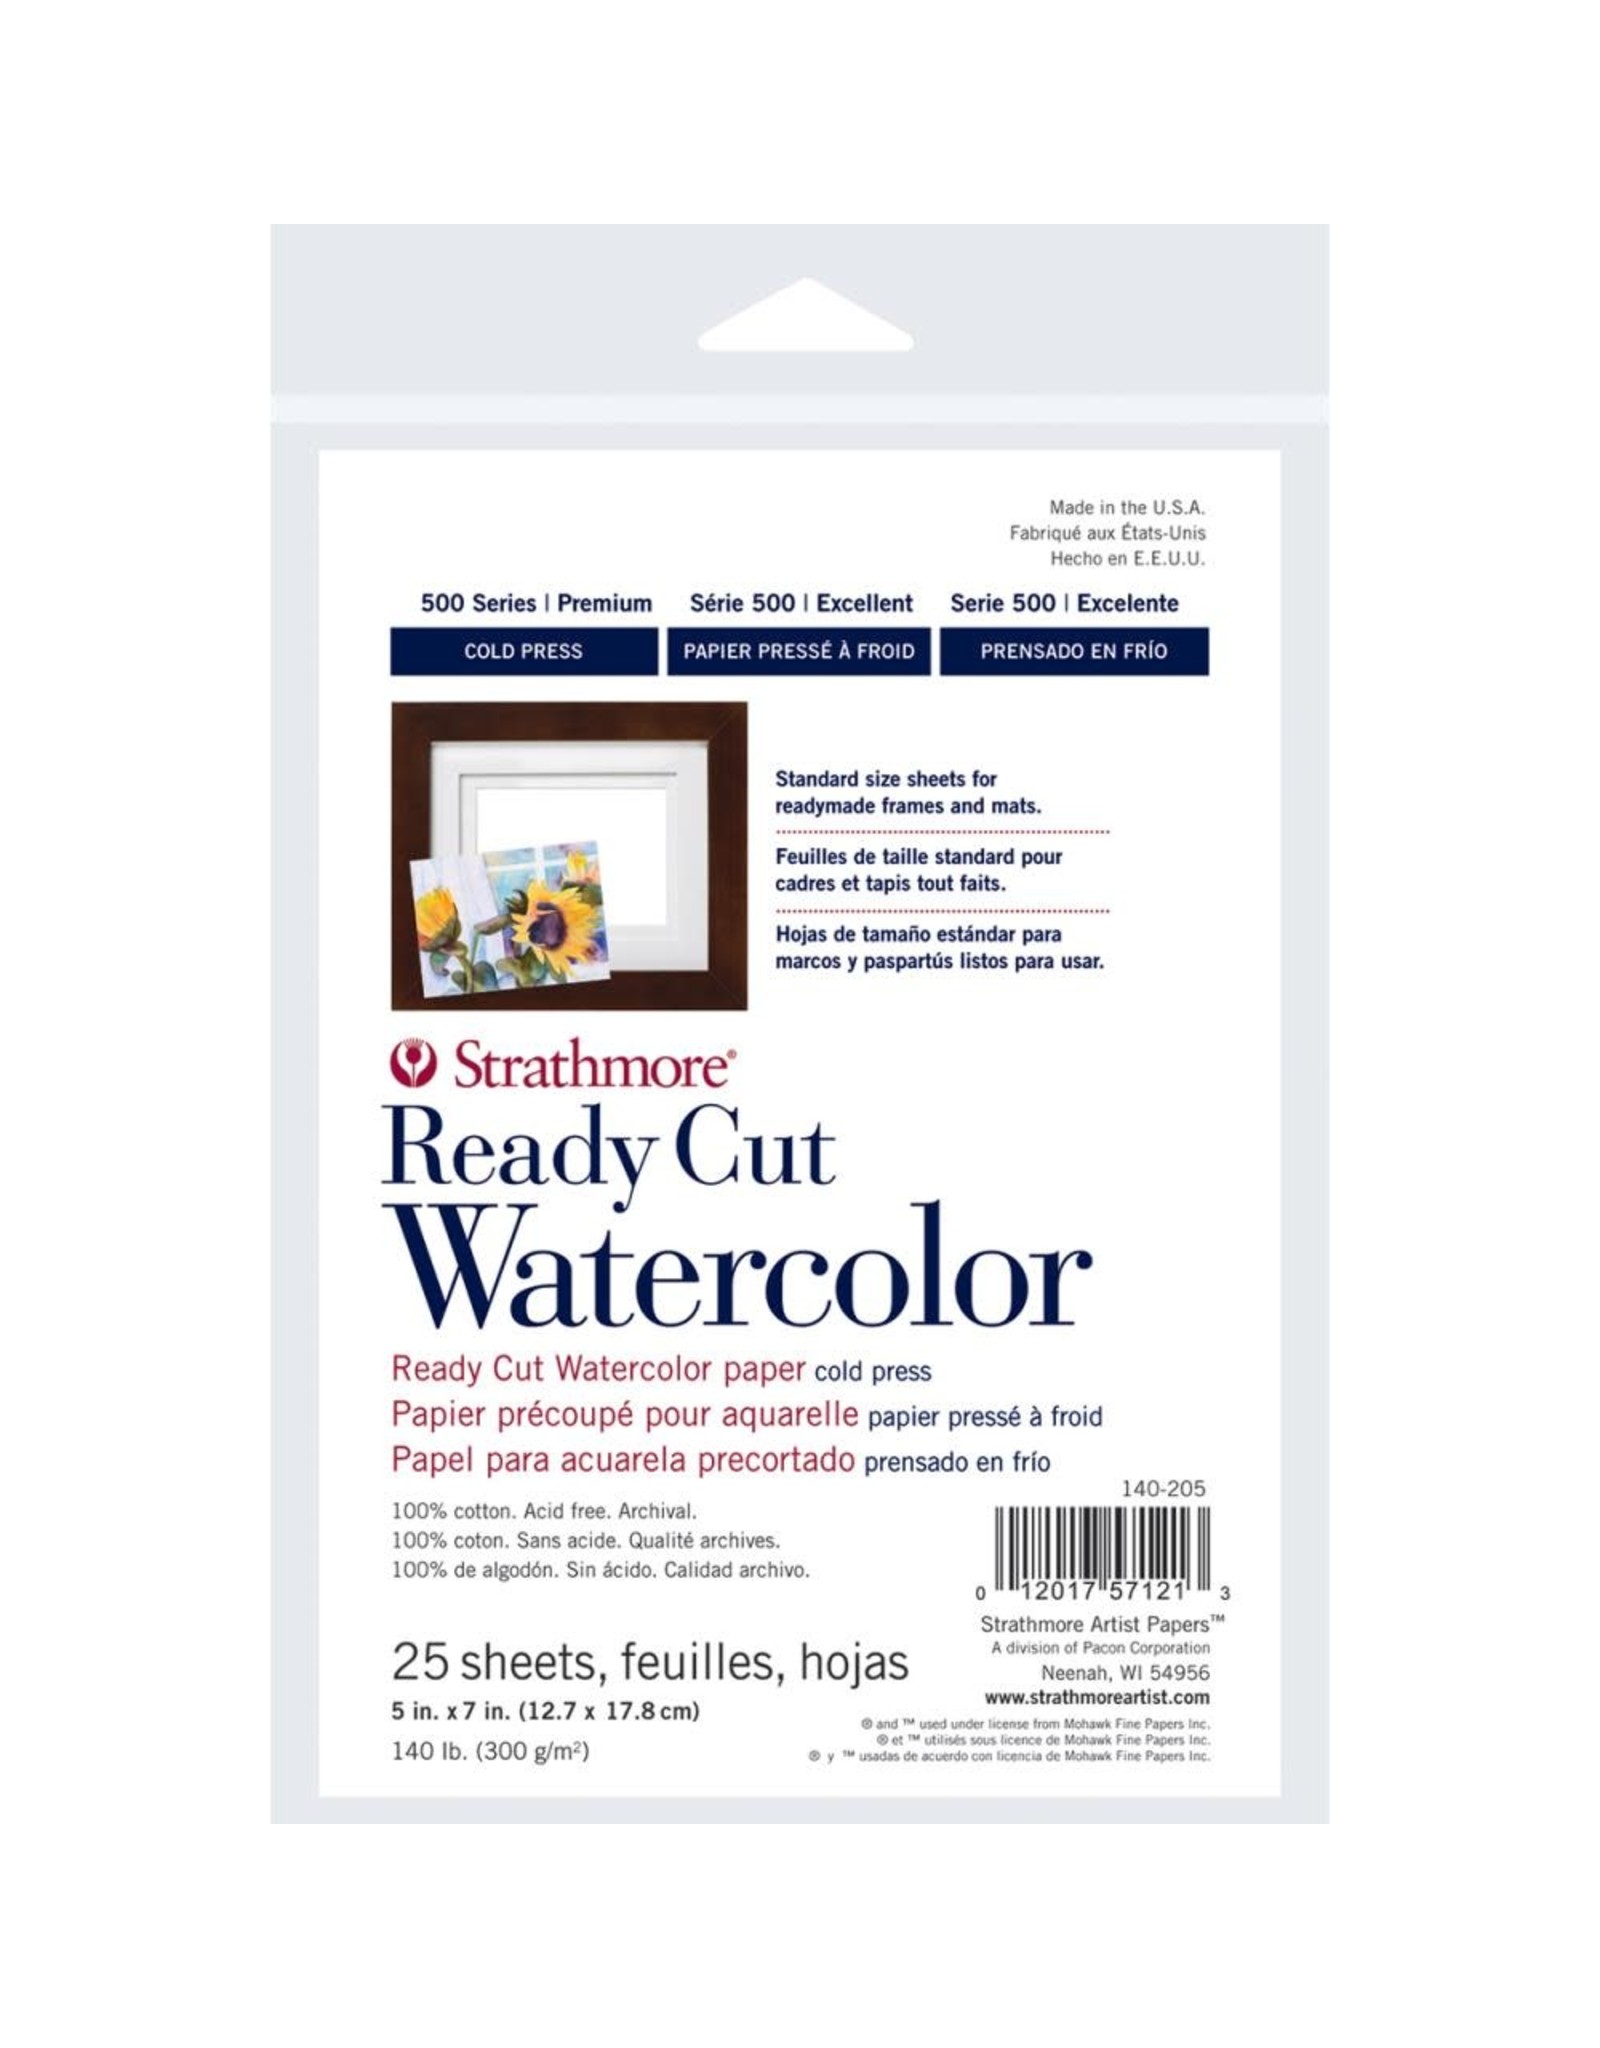 STRATHMORE STRATHMORE READY CUT WATERCOLOR PAPER PACK 5x7 25/PK